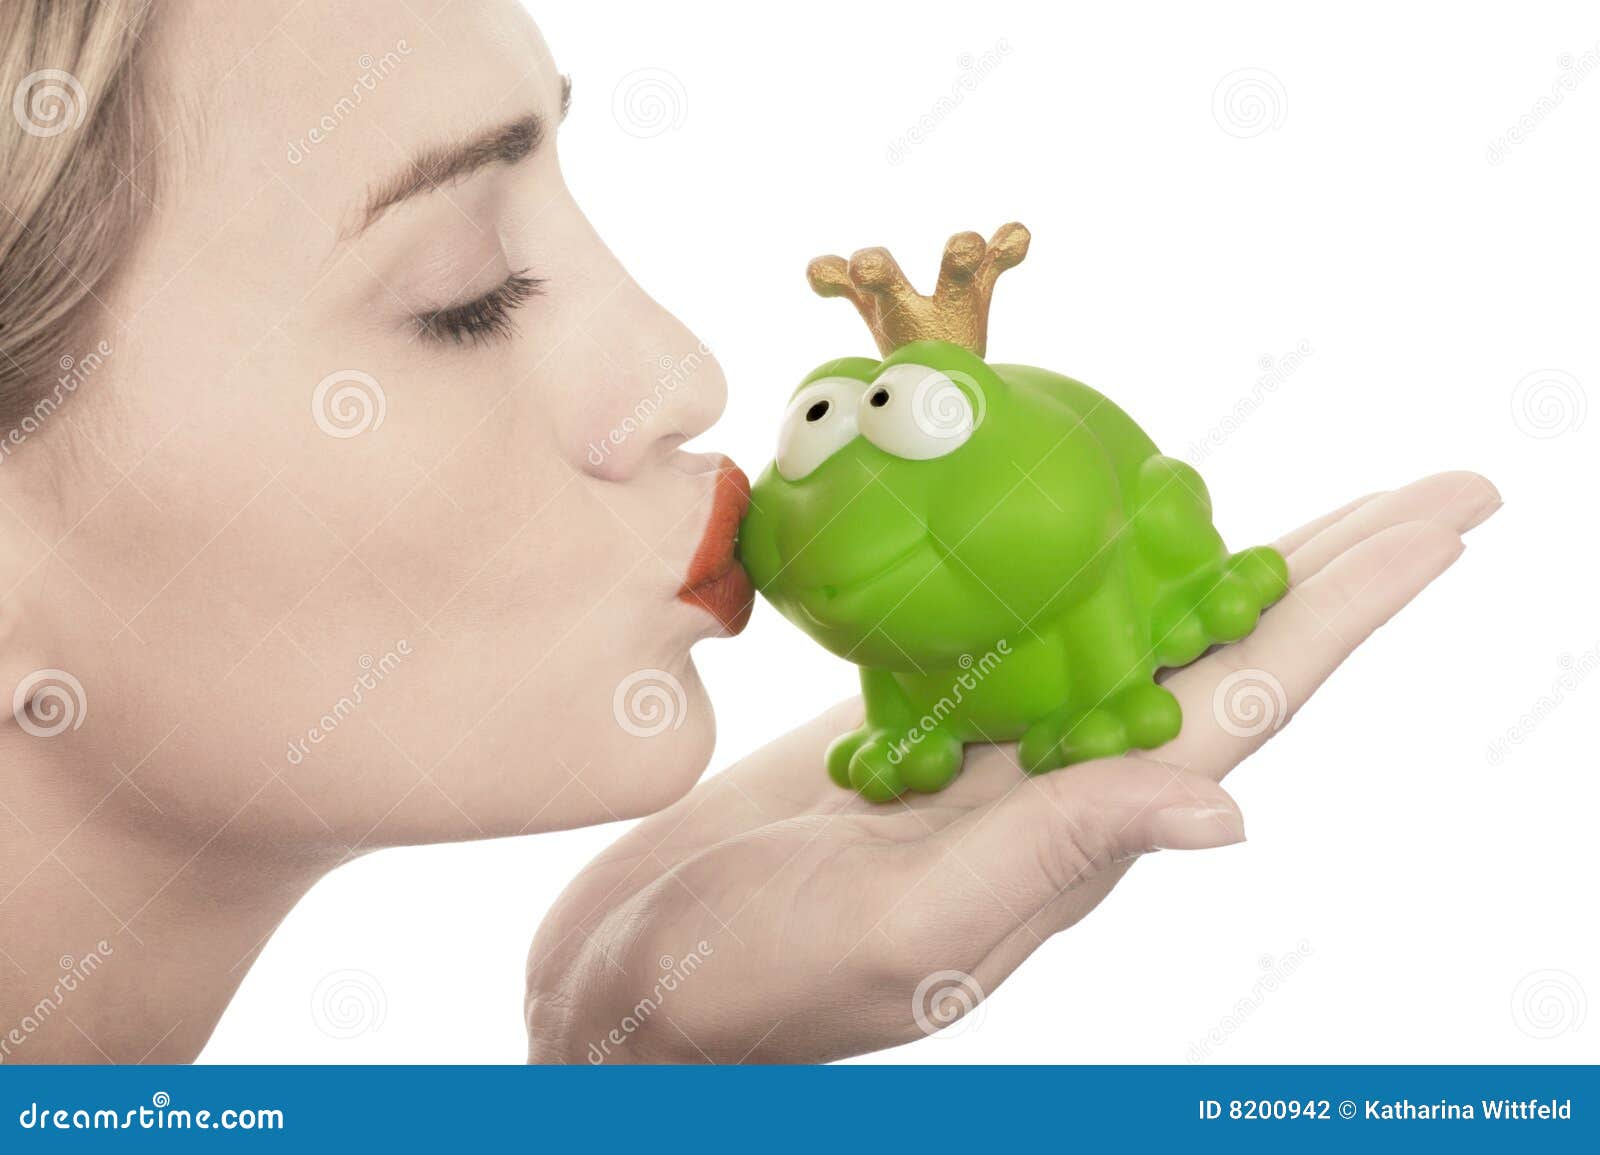 frog price being kissed by a beautiful lady